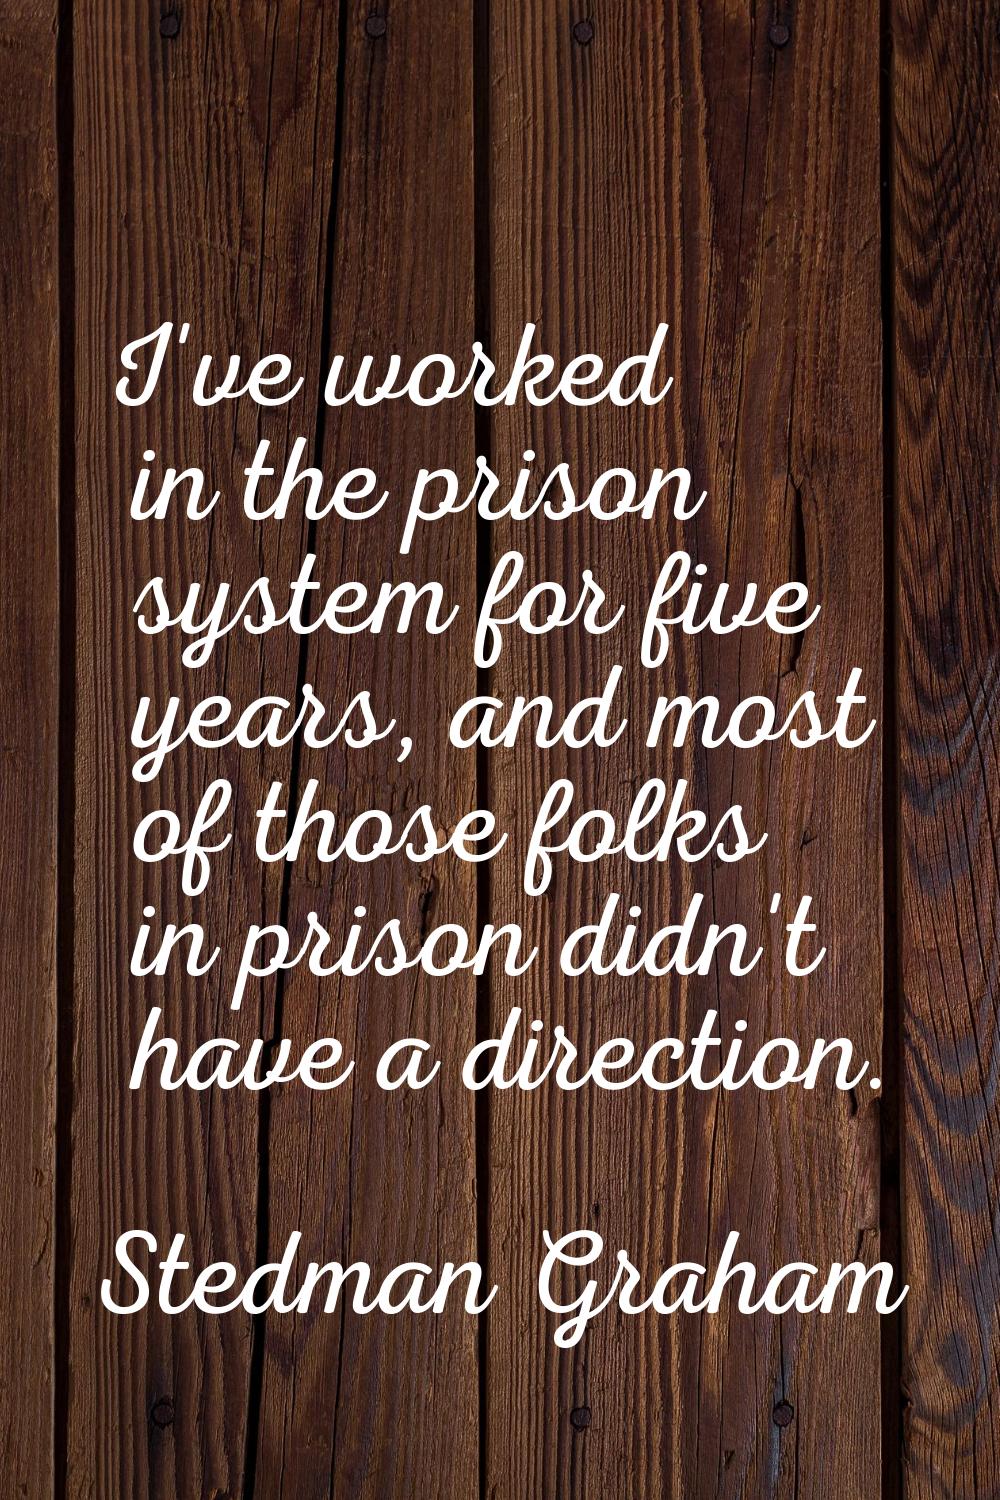 I've worked in the prison system for five years, and most of those folks in prison didn't have a di